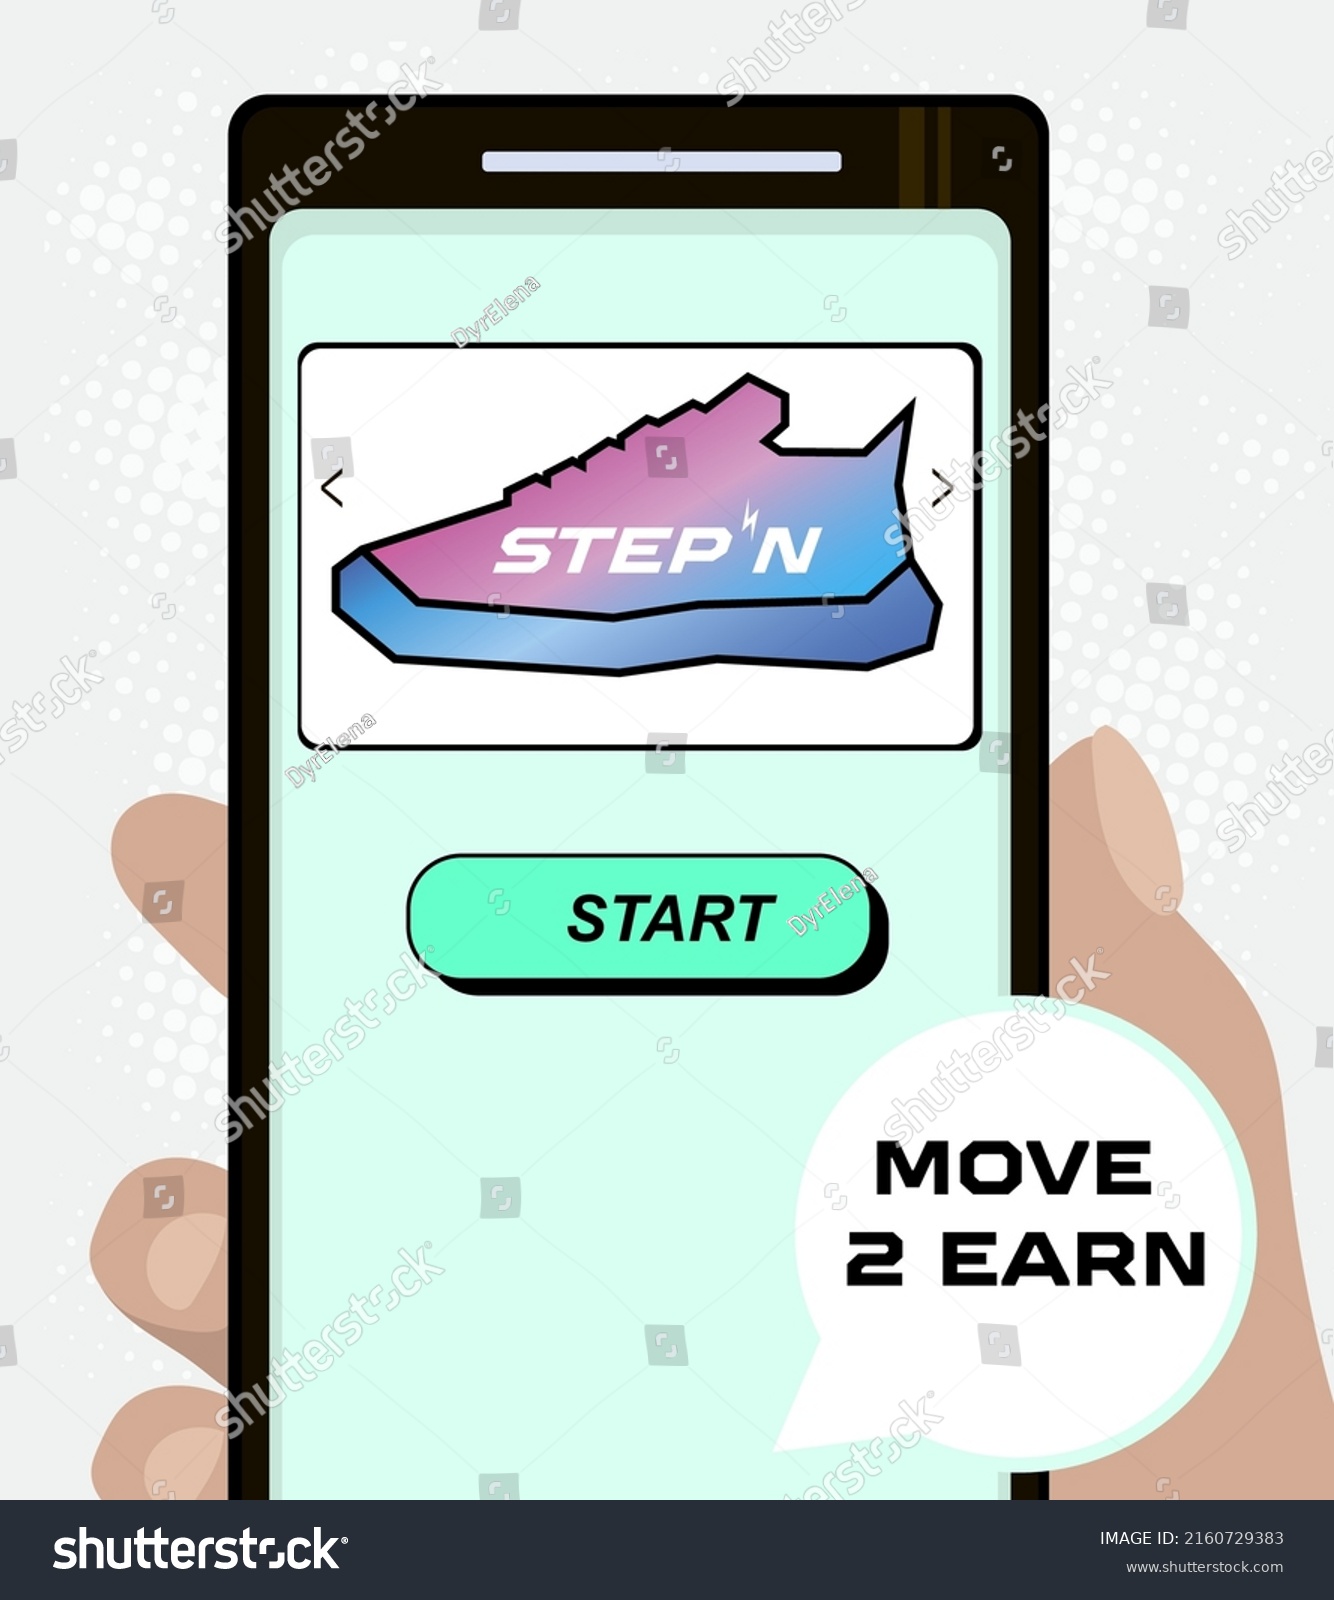 SVG of Smartphone with virtual shoes, text move 2 earn and button start svg